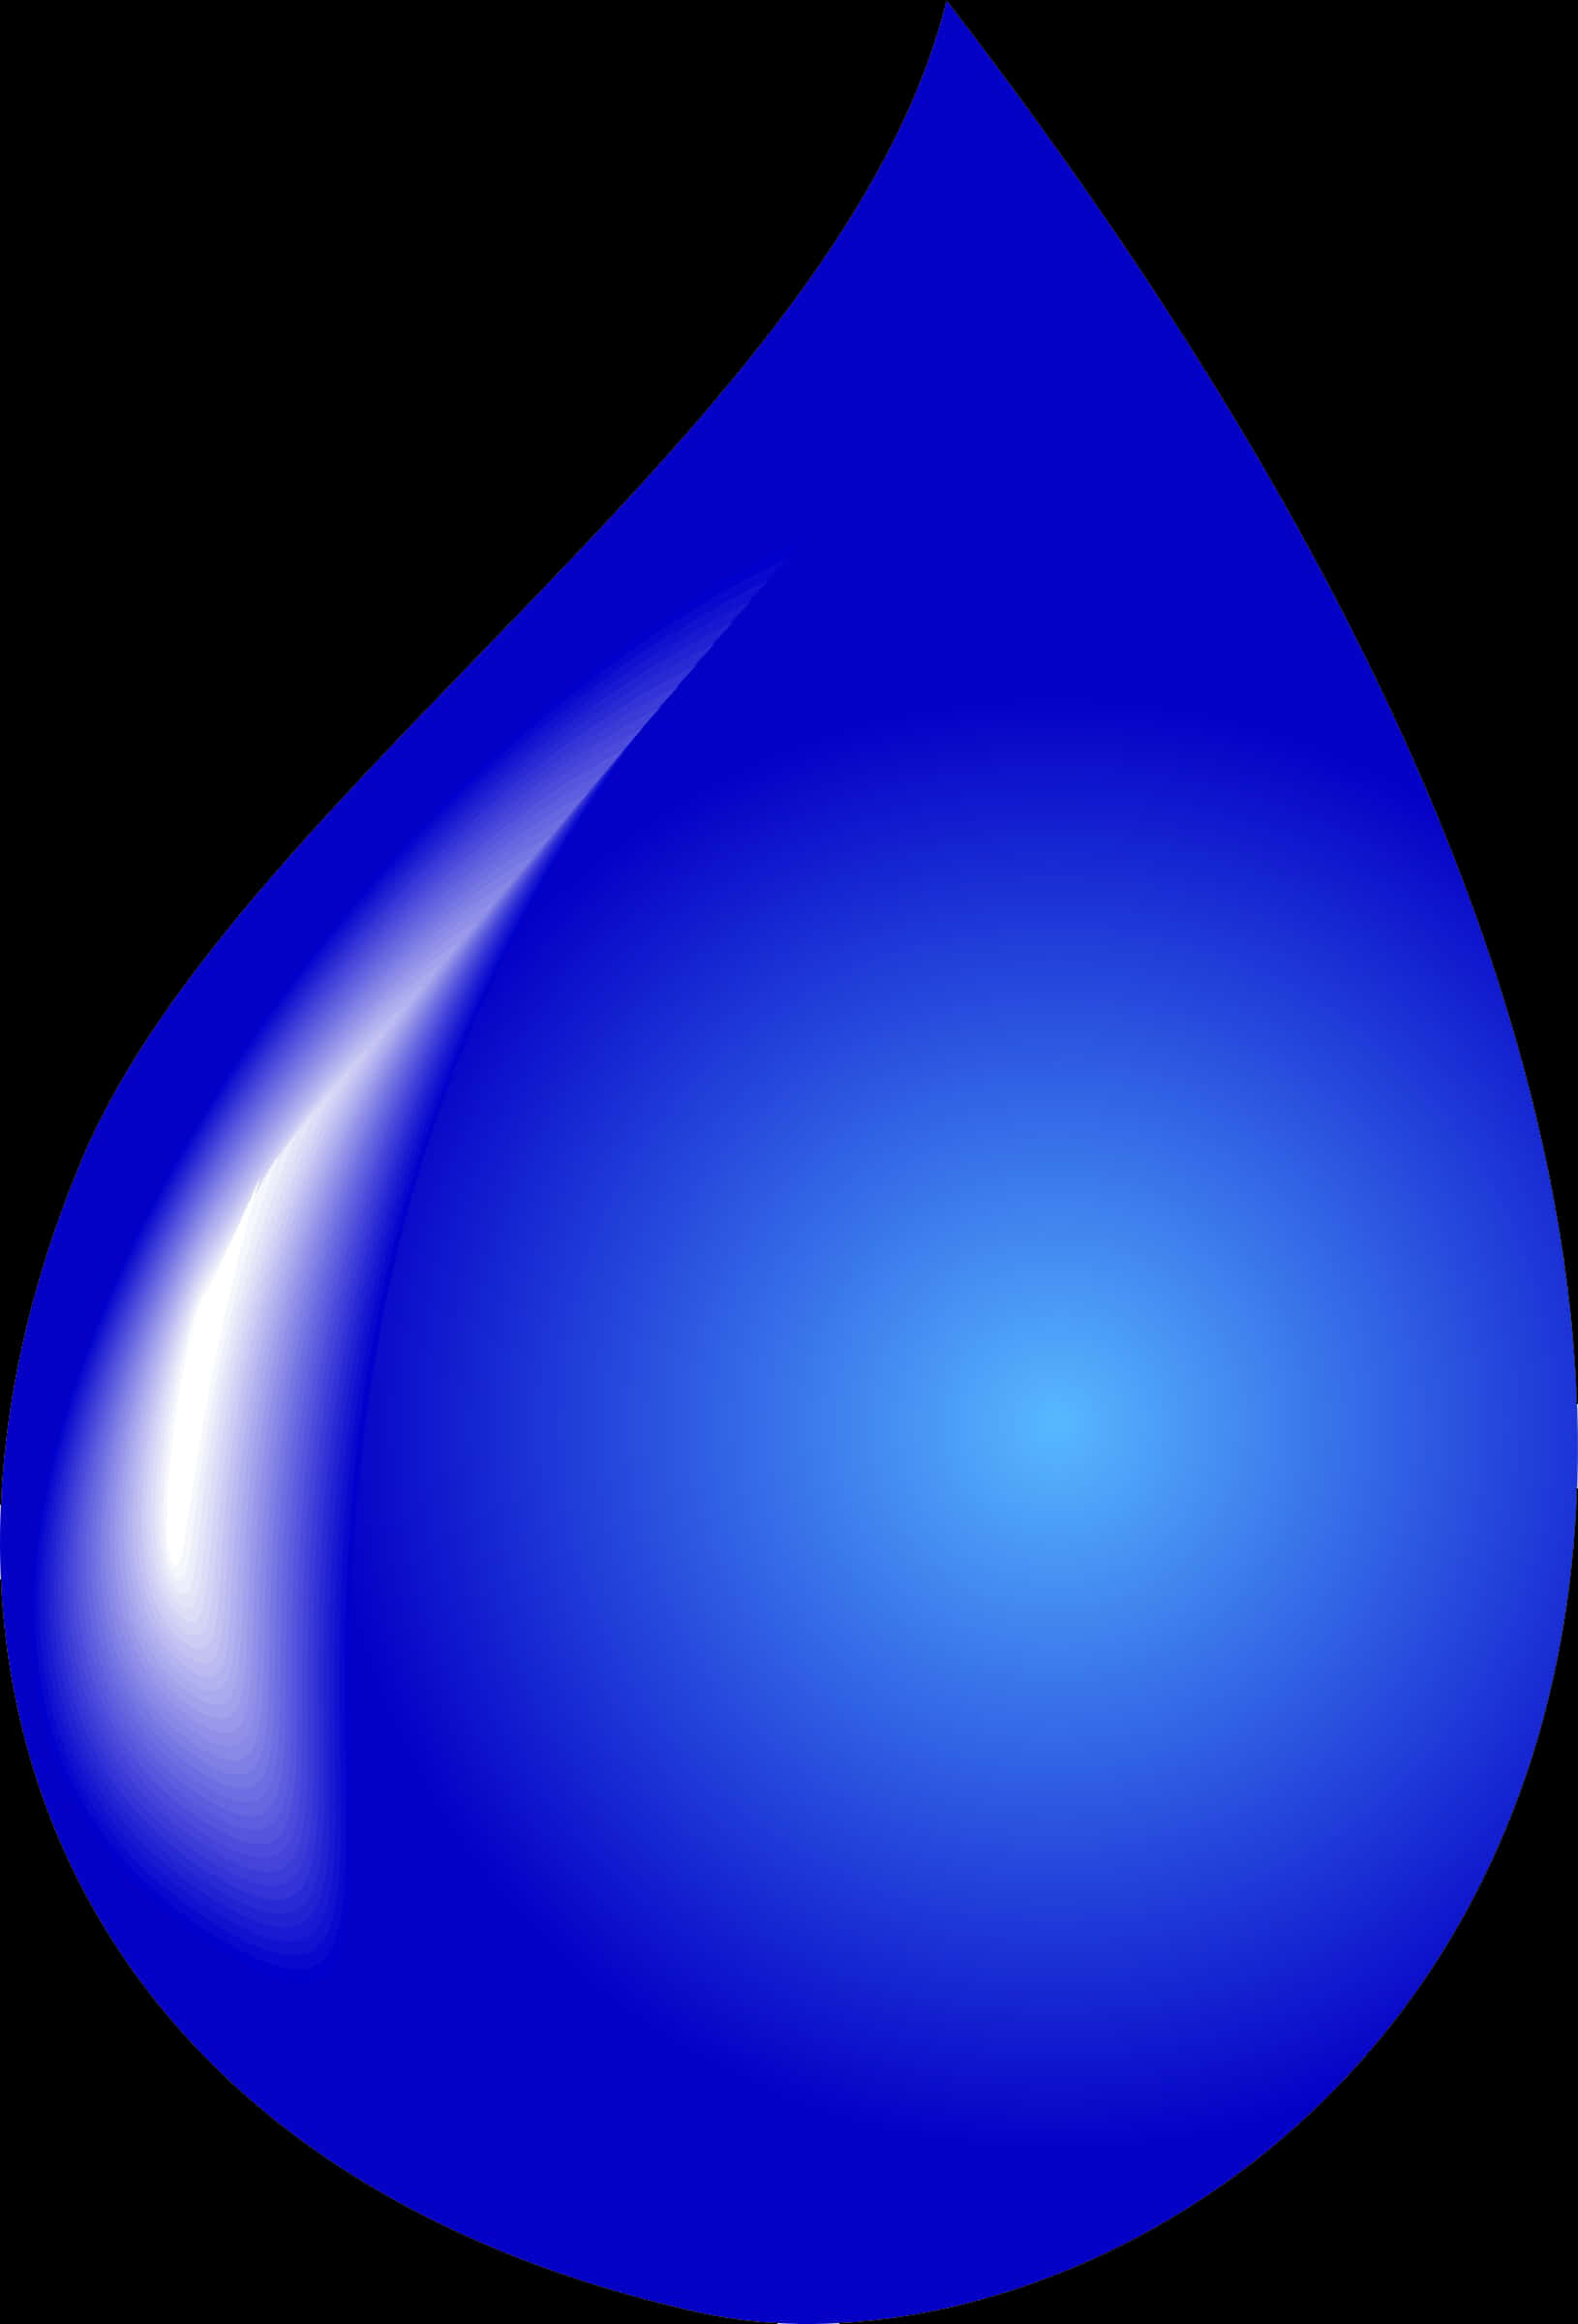 Blue Water Drop Graphic PNG image